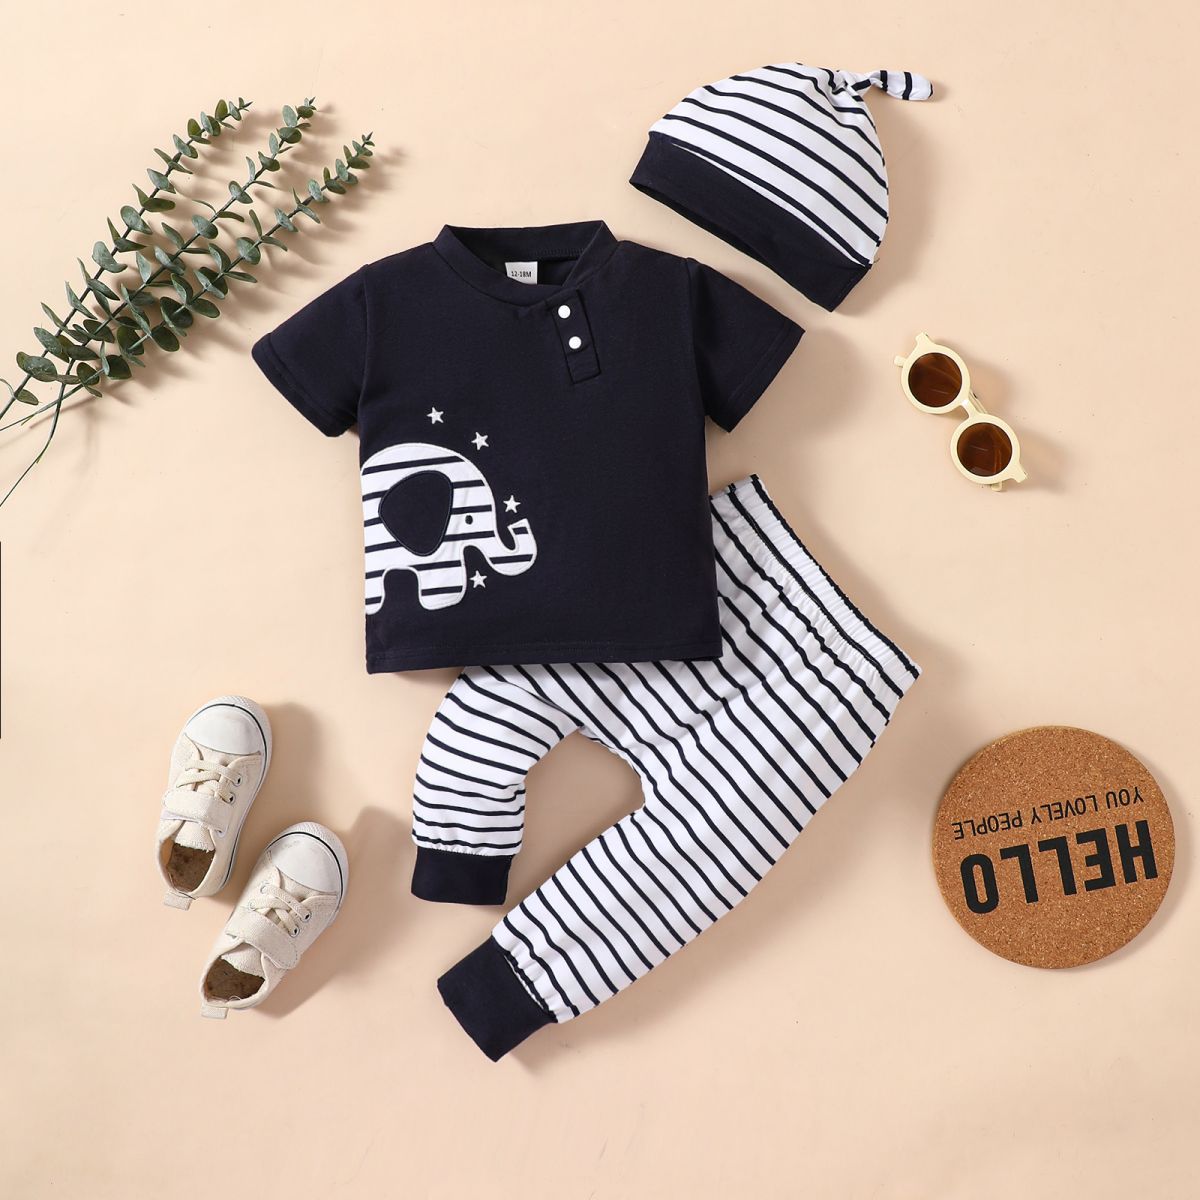 Children’s Boys Elephant Graphic Top and Striped Pants Set